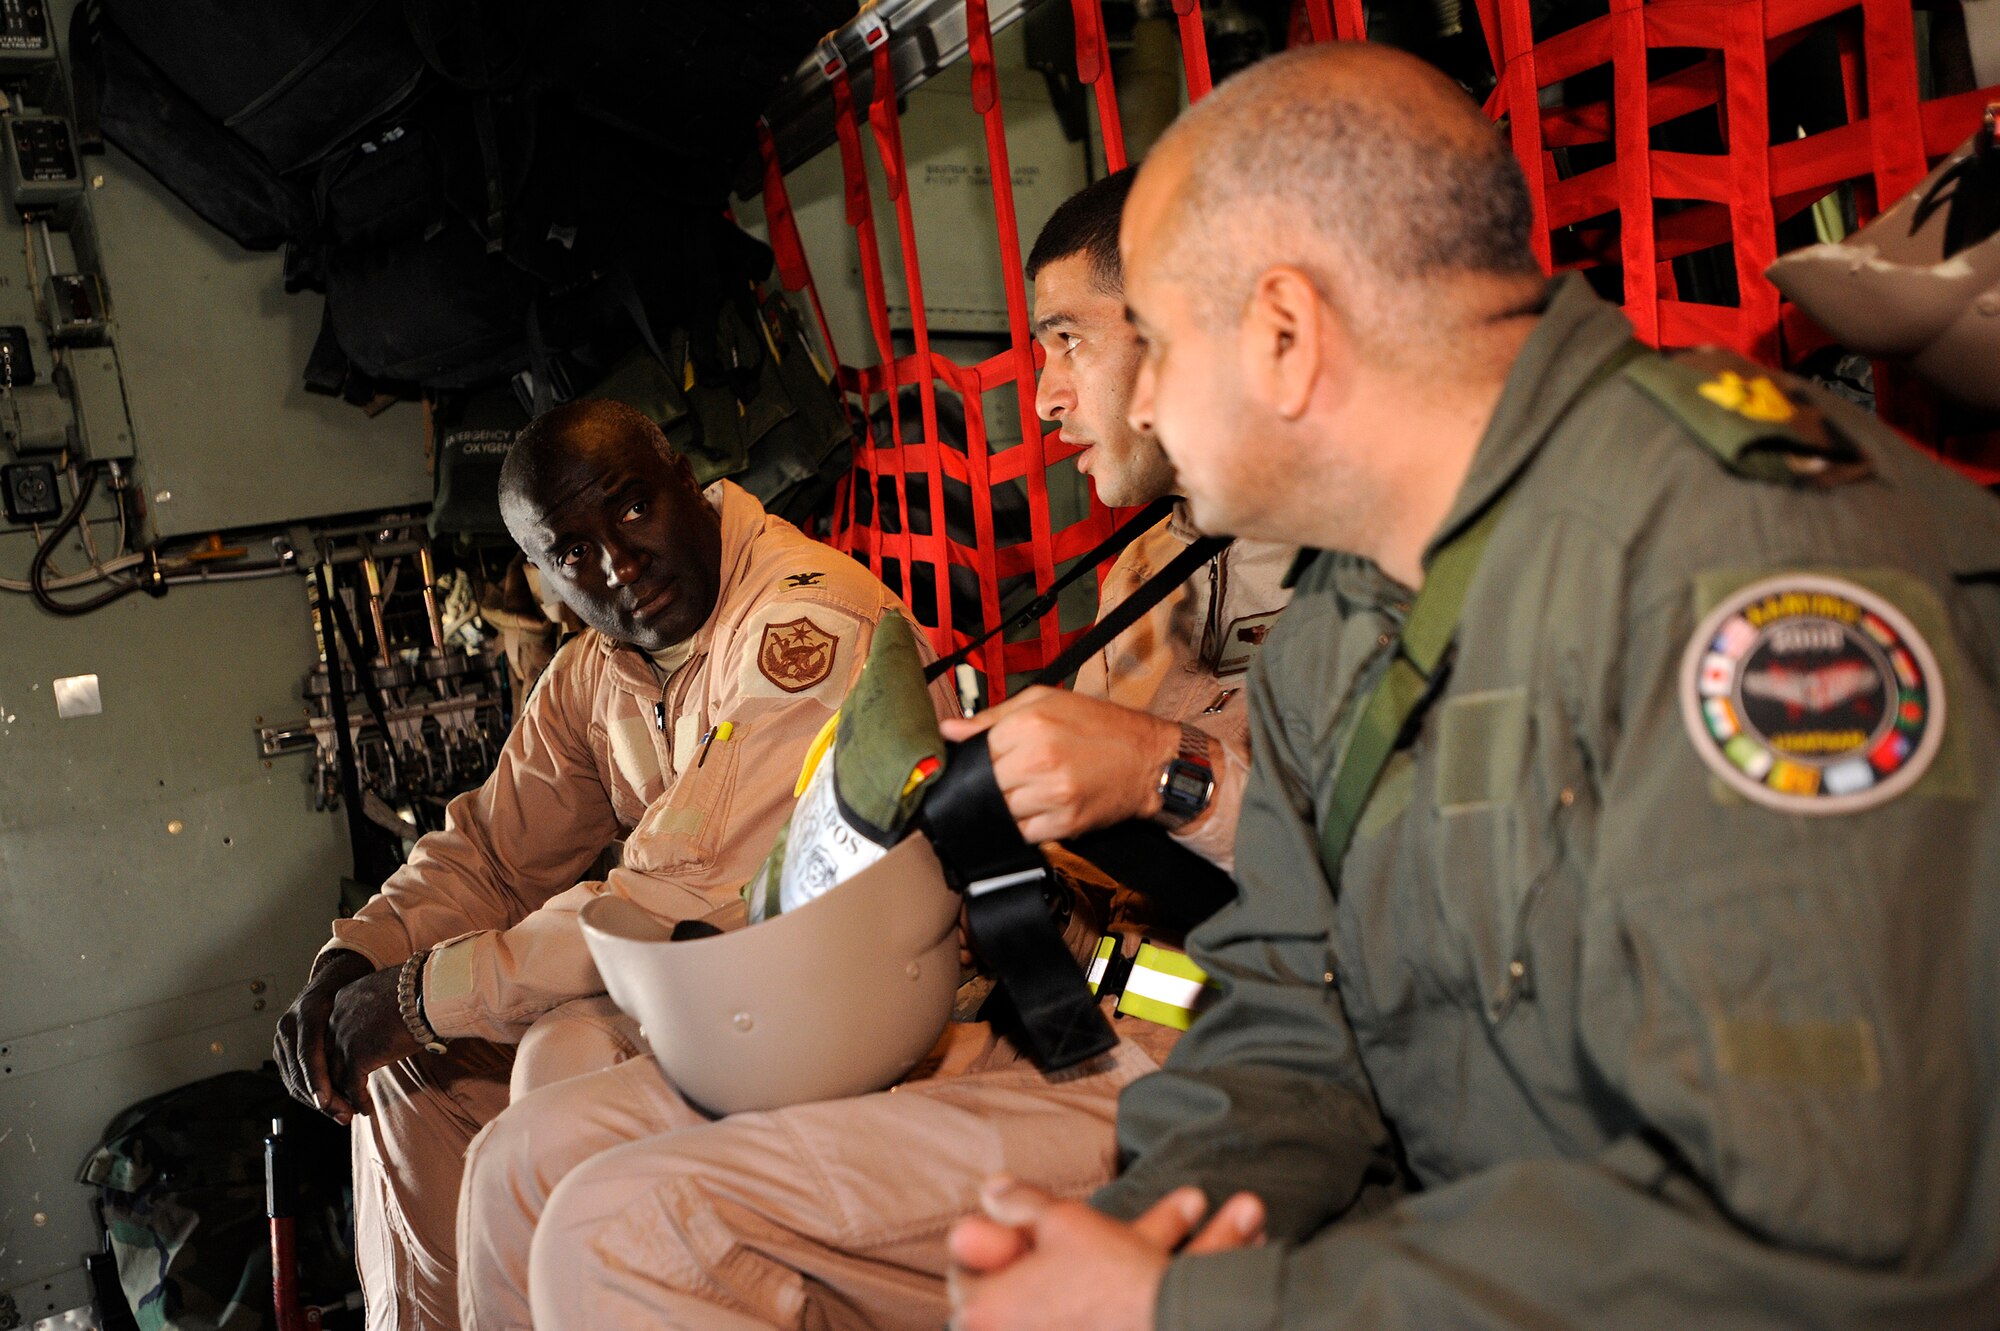 Col. (Dr.) Paul Young converses with Iraqi air force Capt. (Dr.) Mohammed and Iraqi air force Maj. (Dr.) Abdul-Razaq before departing on an aeromedical evacuation mission over Iraq Nov. 7. The two Iraqi doctors from Iraq's Ministry of Defense accompanied the U.S. Air Force mission to study aeromedical evacuation procedures so that they can establish an aeromedical evacuation service for the Iraqi air force. Young, the surgeon general for the Coalition Air Forces Transition Team, is deployed from Ramstein Air Base, Germany. (U.S. Air Force photo/Airman 1st Class Jason Epley)